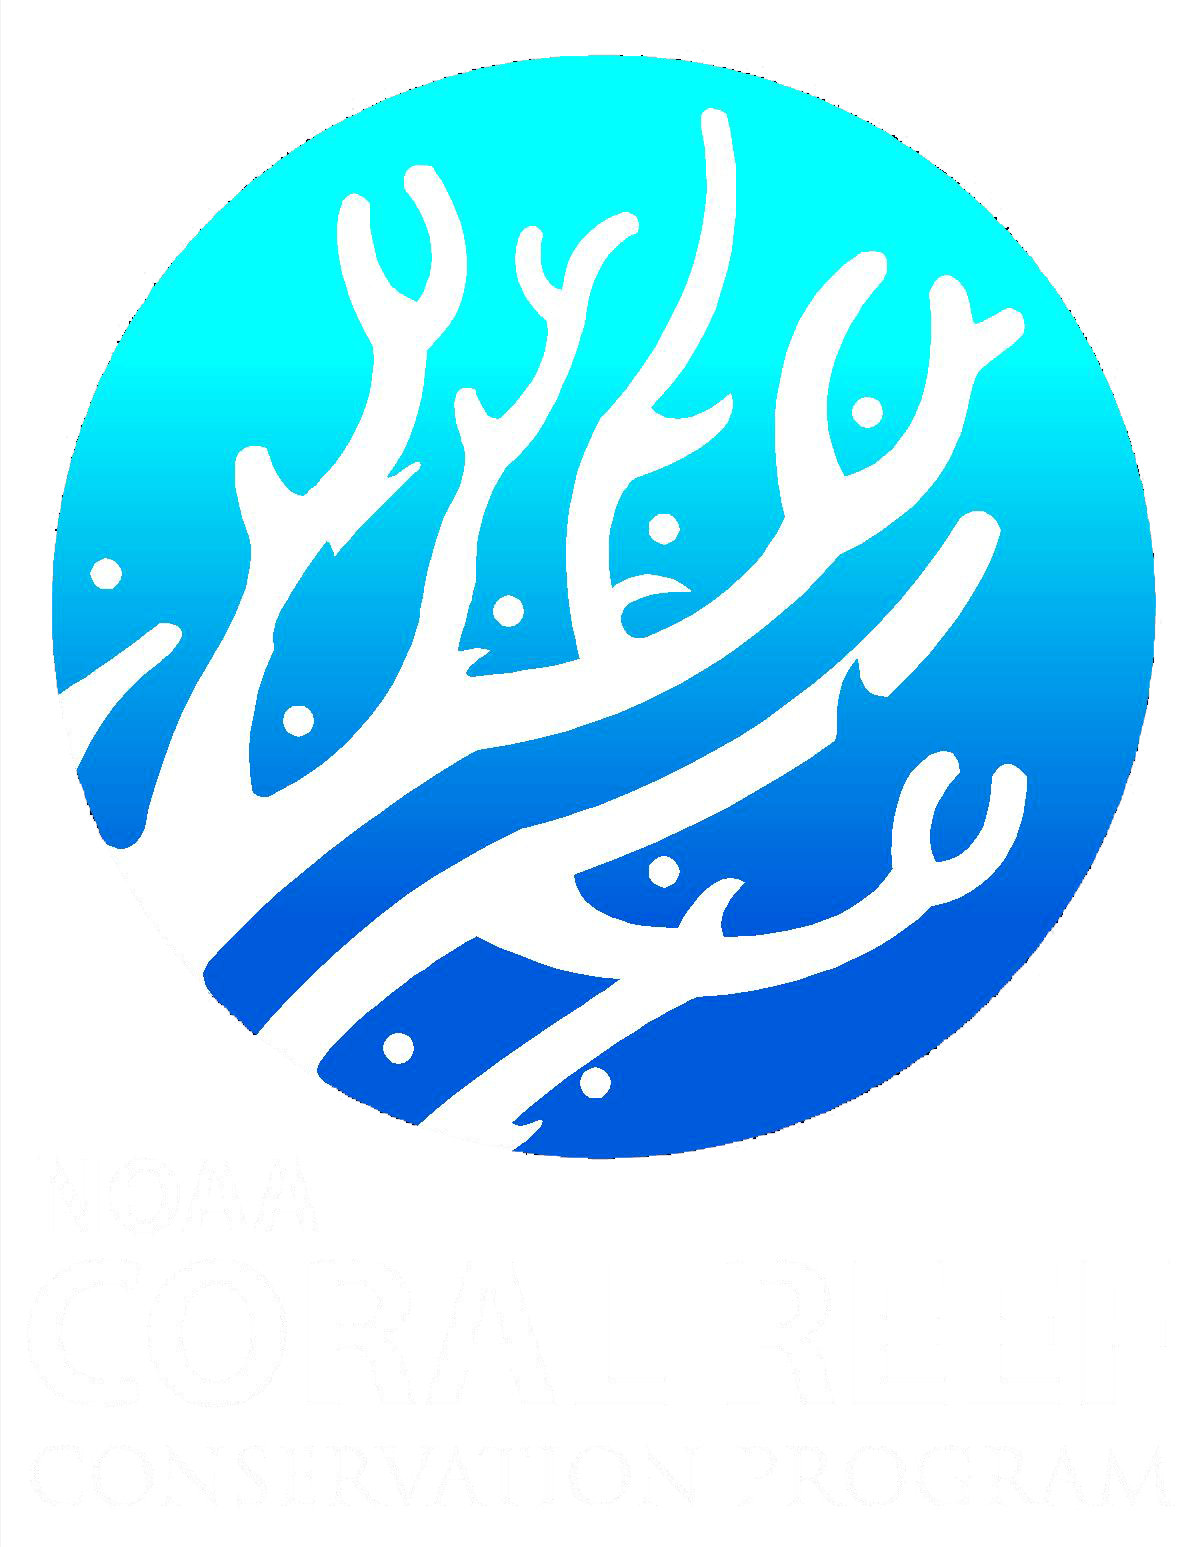 NOAA CoRIS - What are Coral Reefs